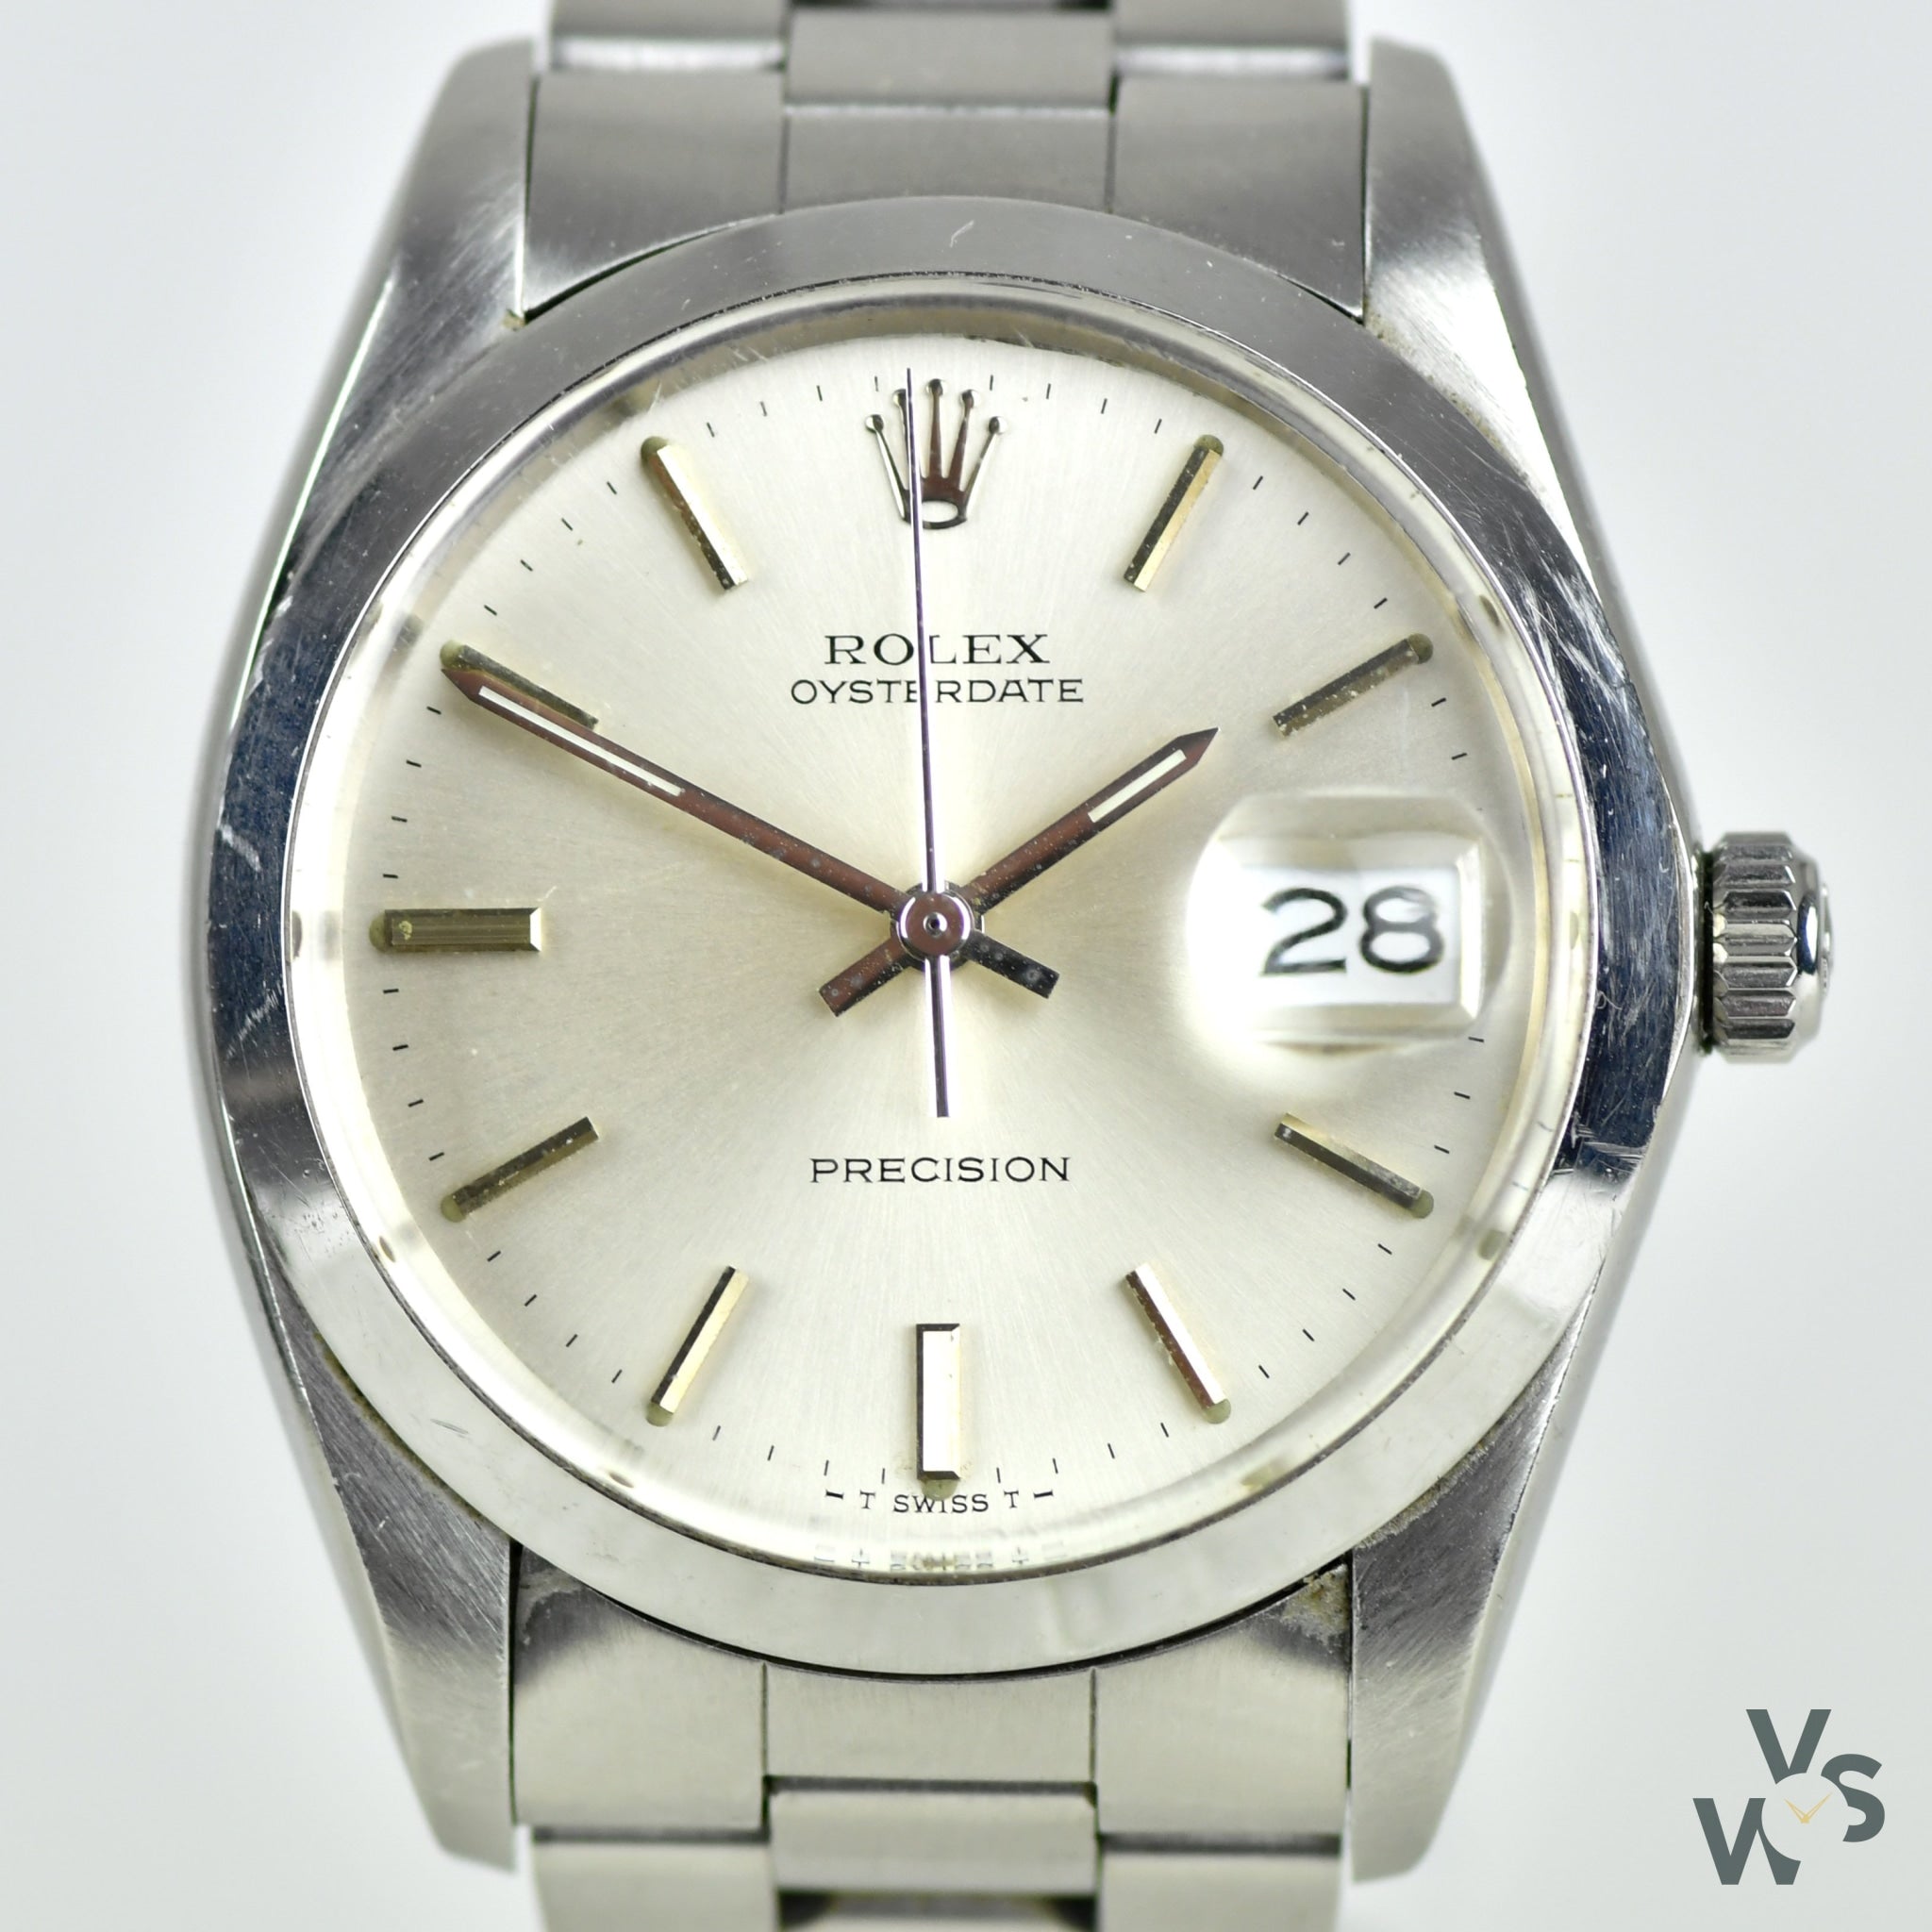 c.1984 Rolex Oysterdate Precision - Stainless Steel 6694 - Calibe – Watch Specialist